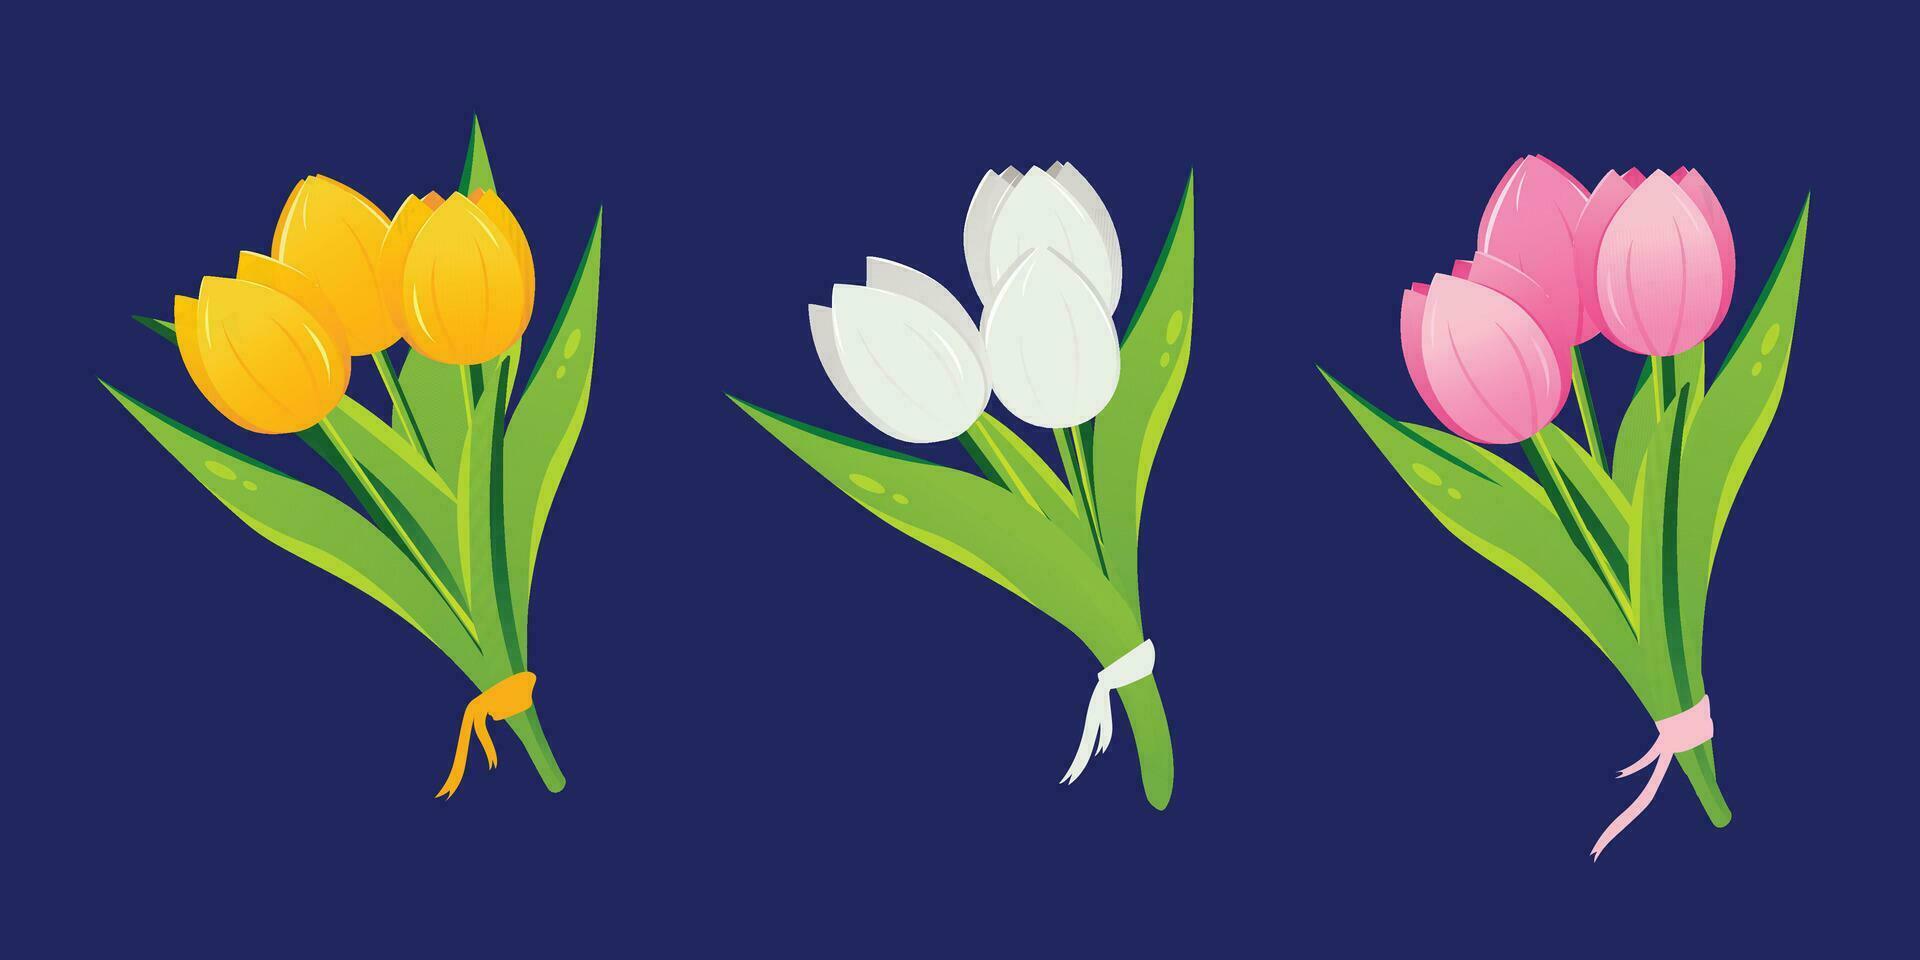 Bouquets of tulips, in a flat vector style. Yellow tulip bouquet, white tulip bouquet, pink tulip bouquet. Women's day, mother's day